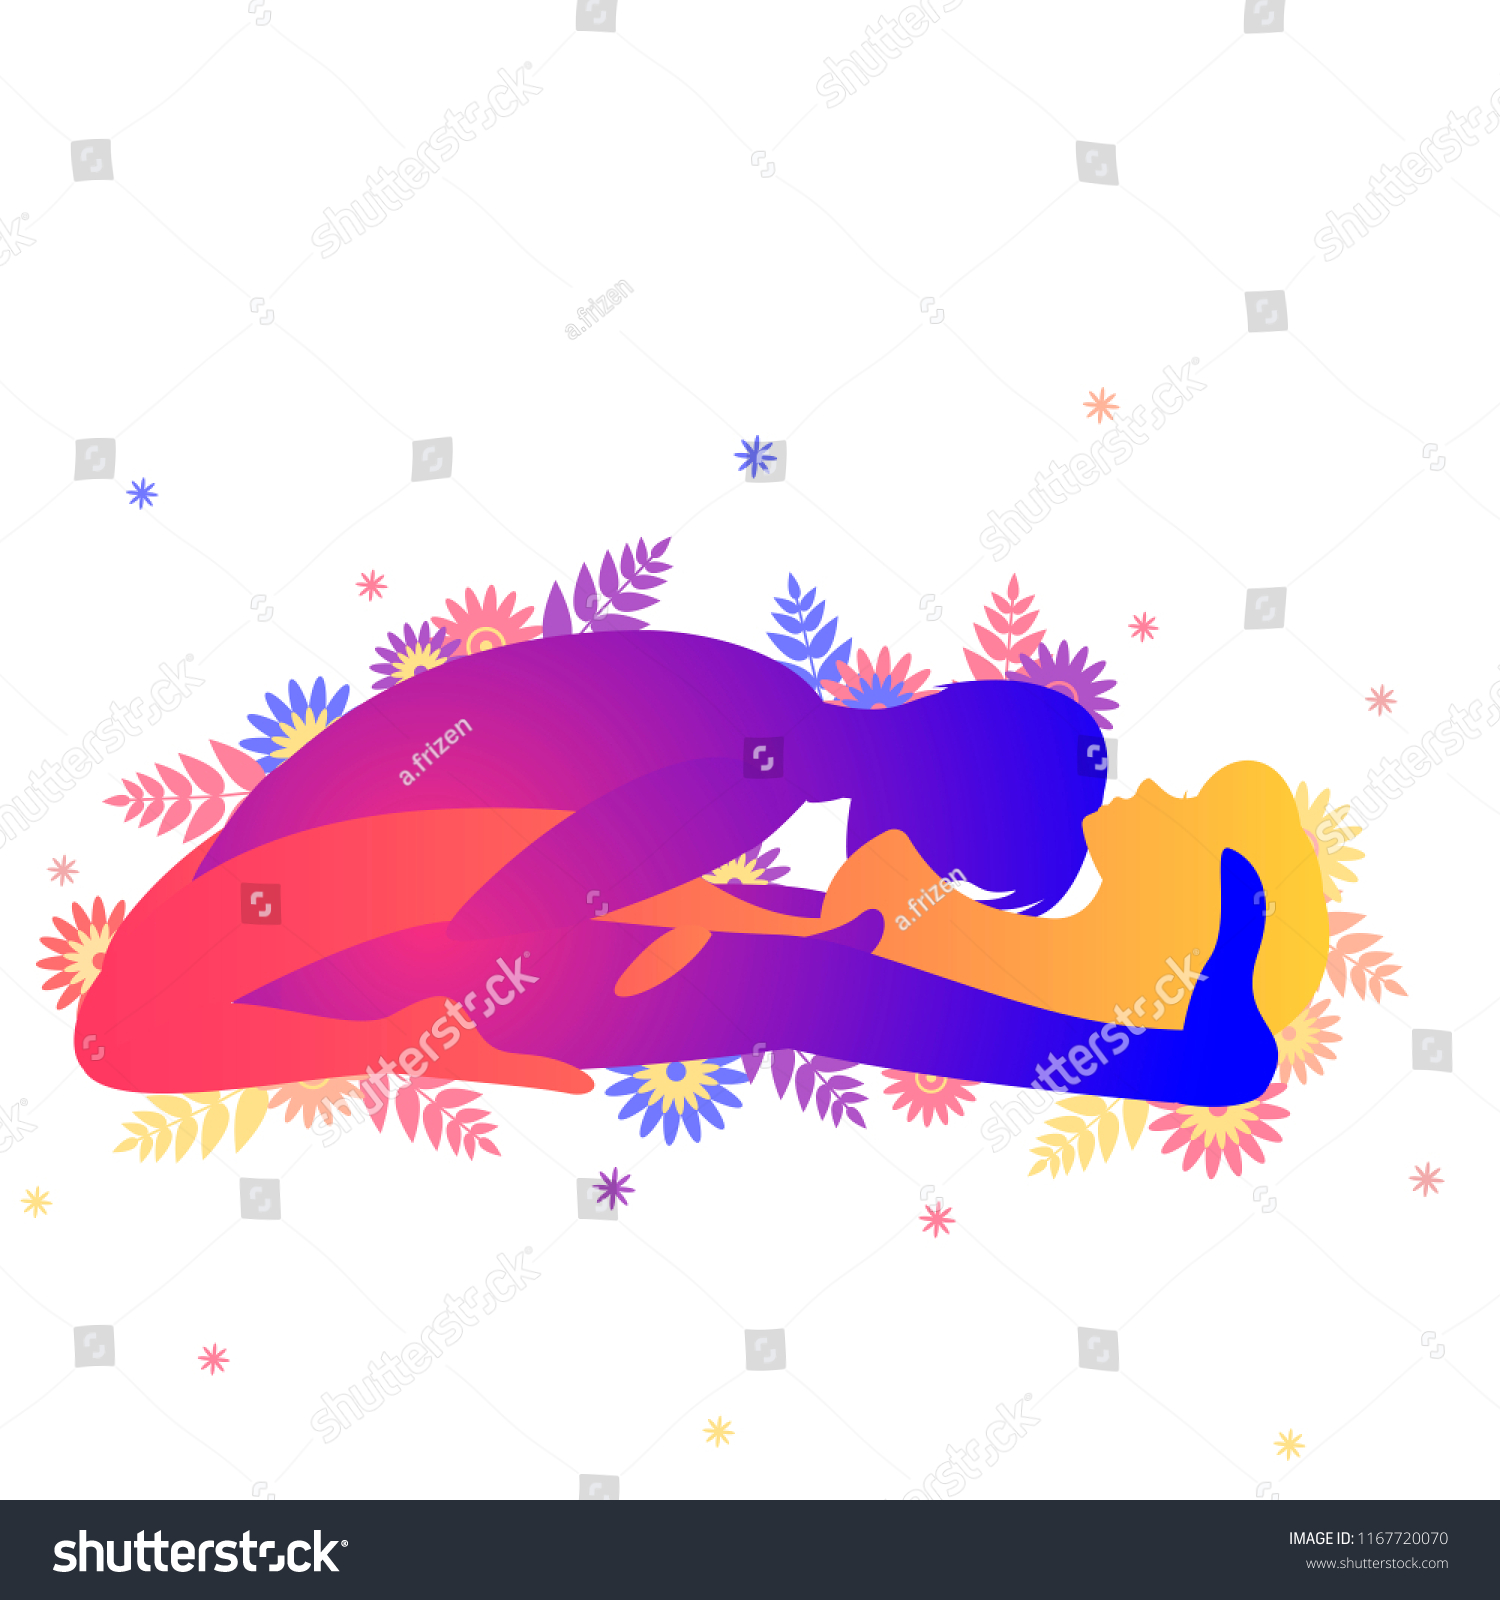 Kama Sutra Sexual Pose Triumph Arch Stock Vector Royalty Free 1167720070 Shutterstock 